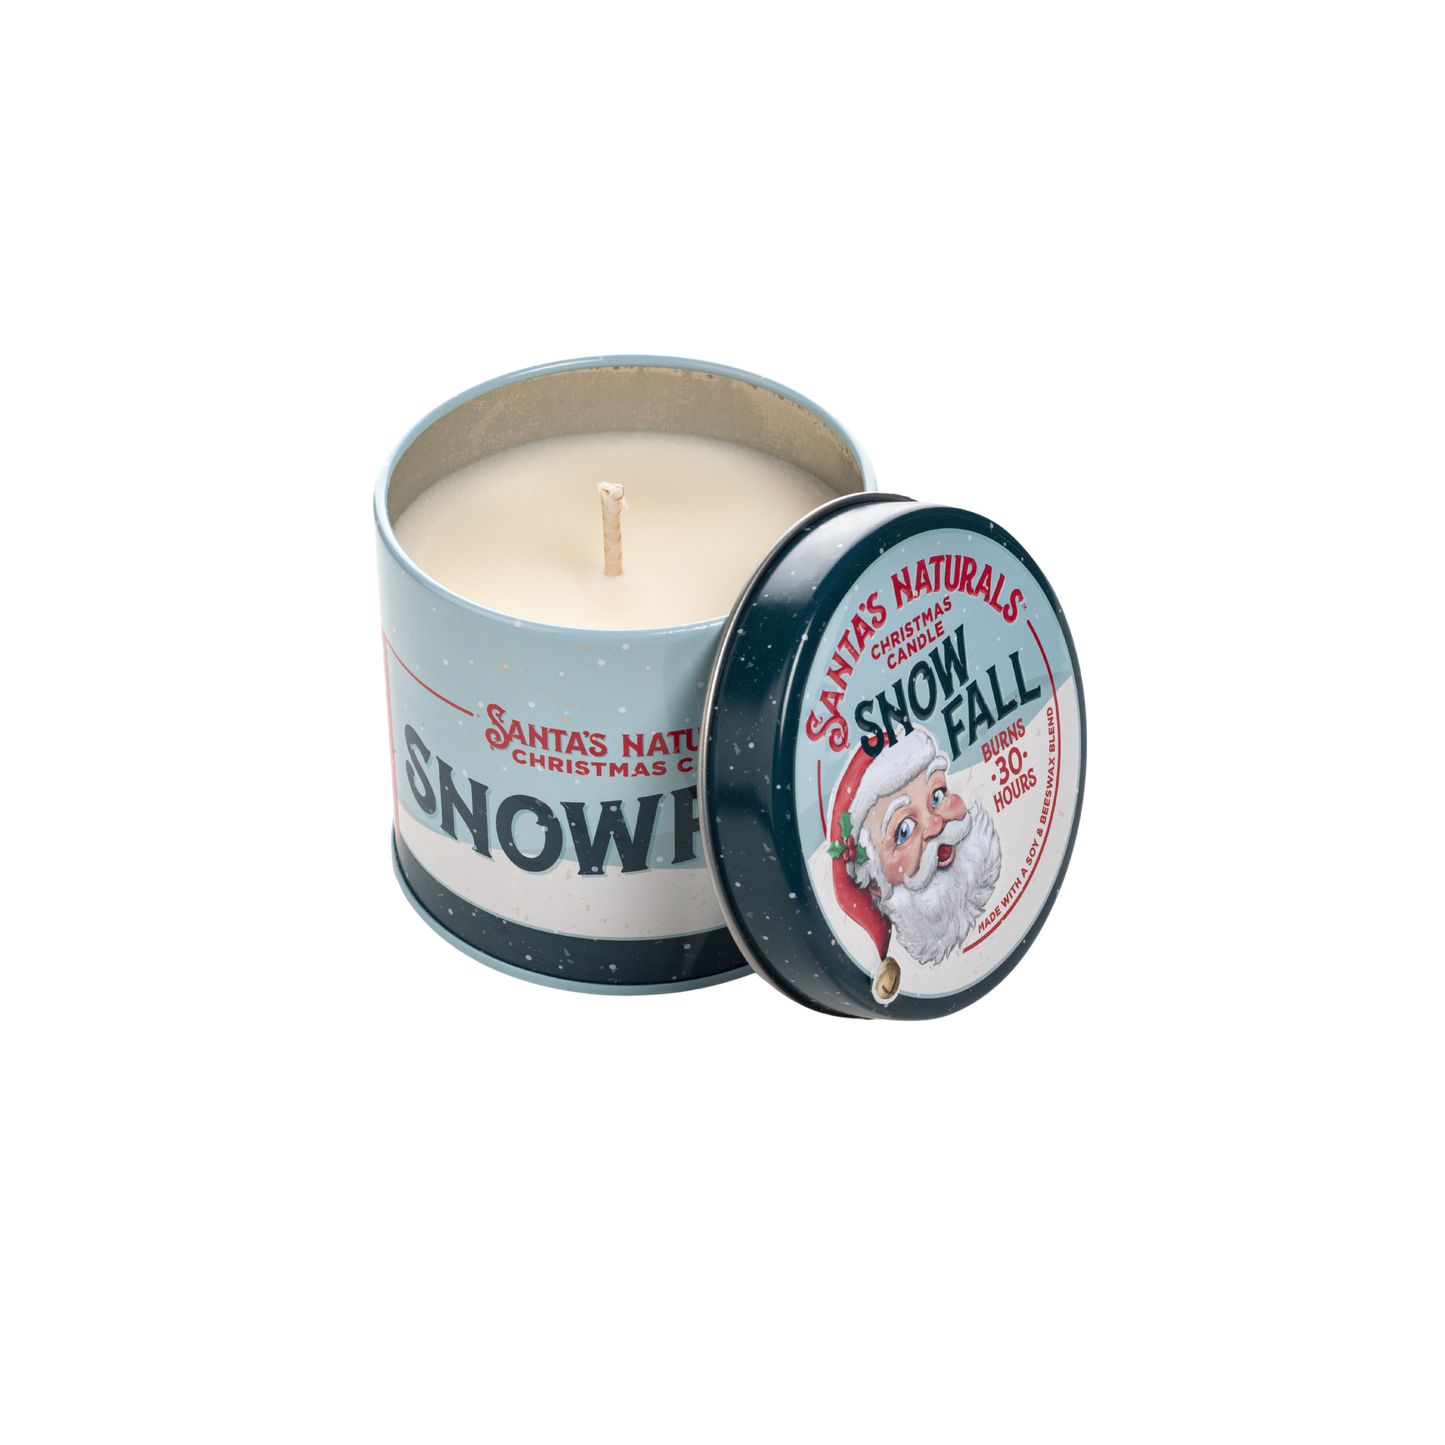 Santa's Naturals Snow Fall 9oz Candle - Case of 6 - Table Top Display